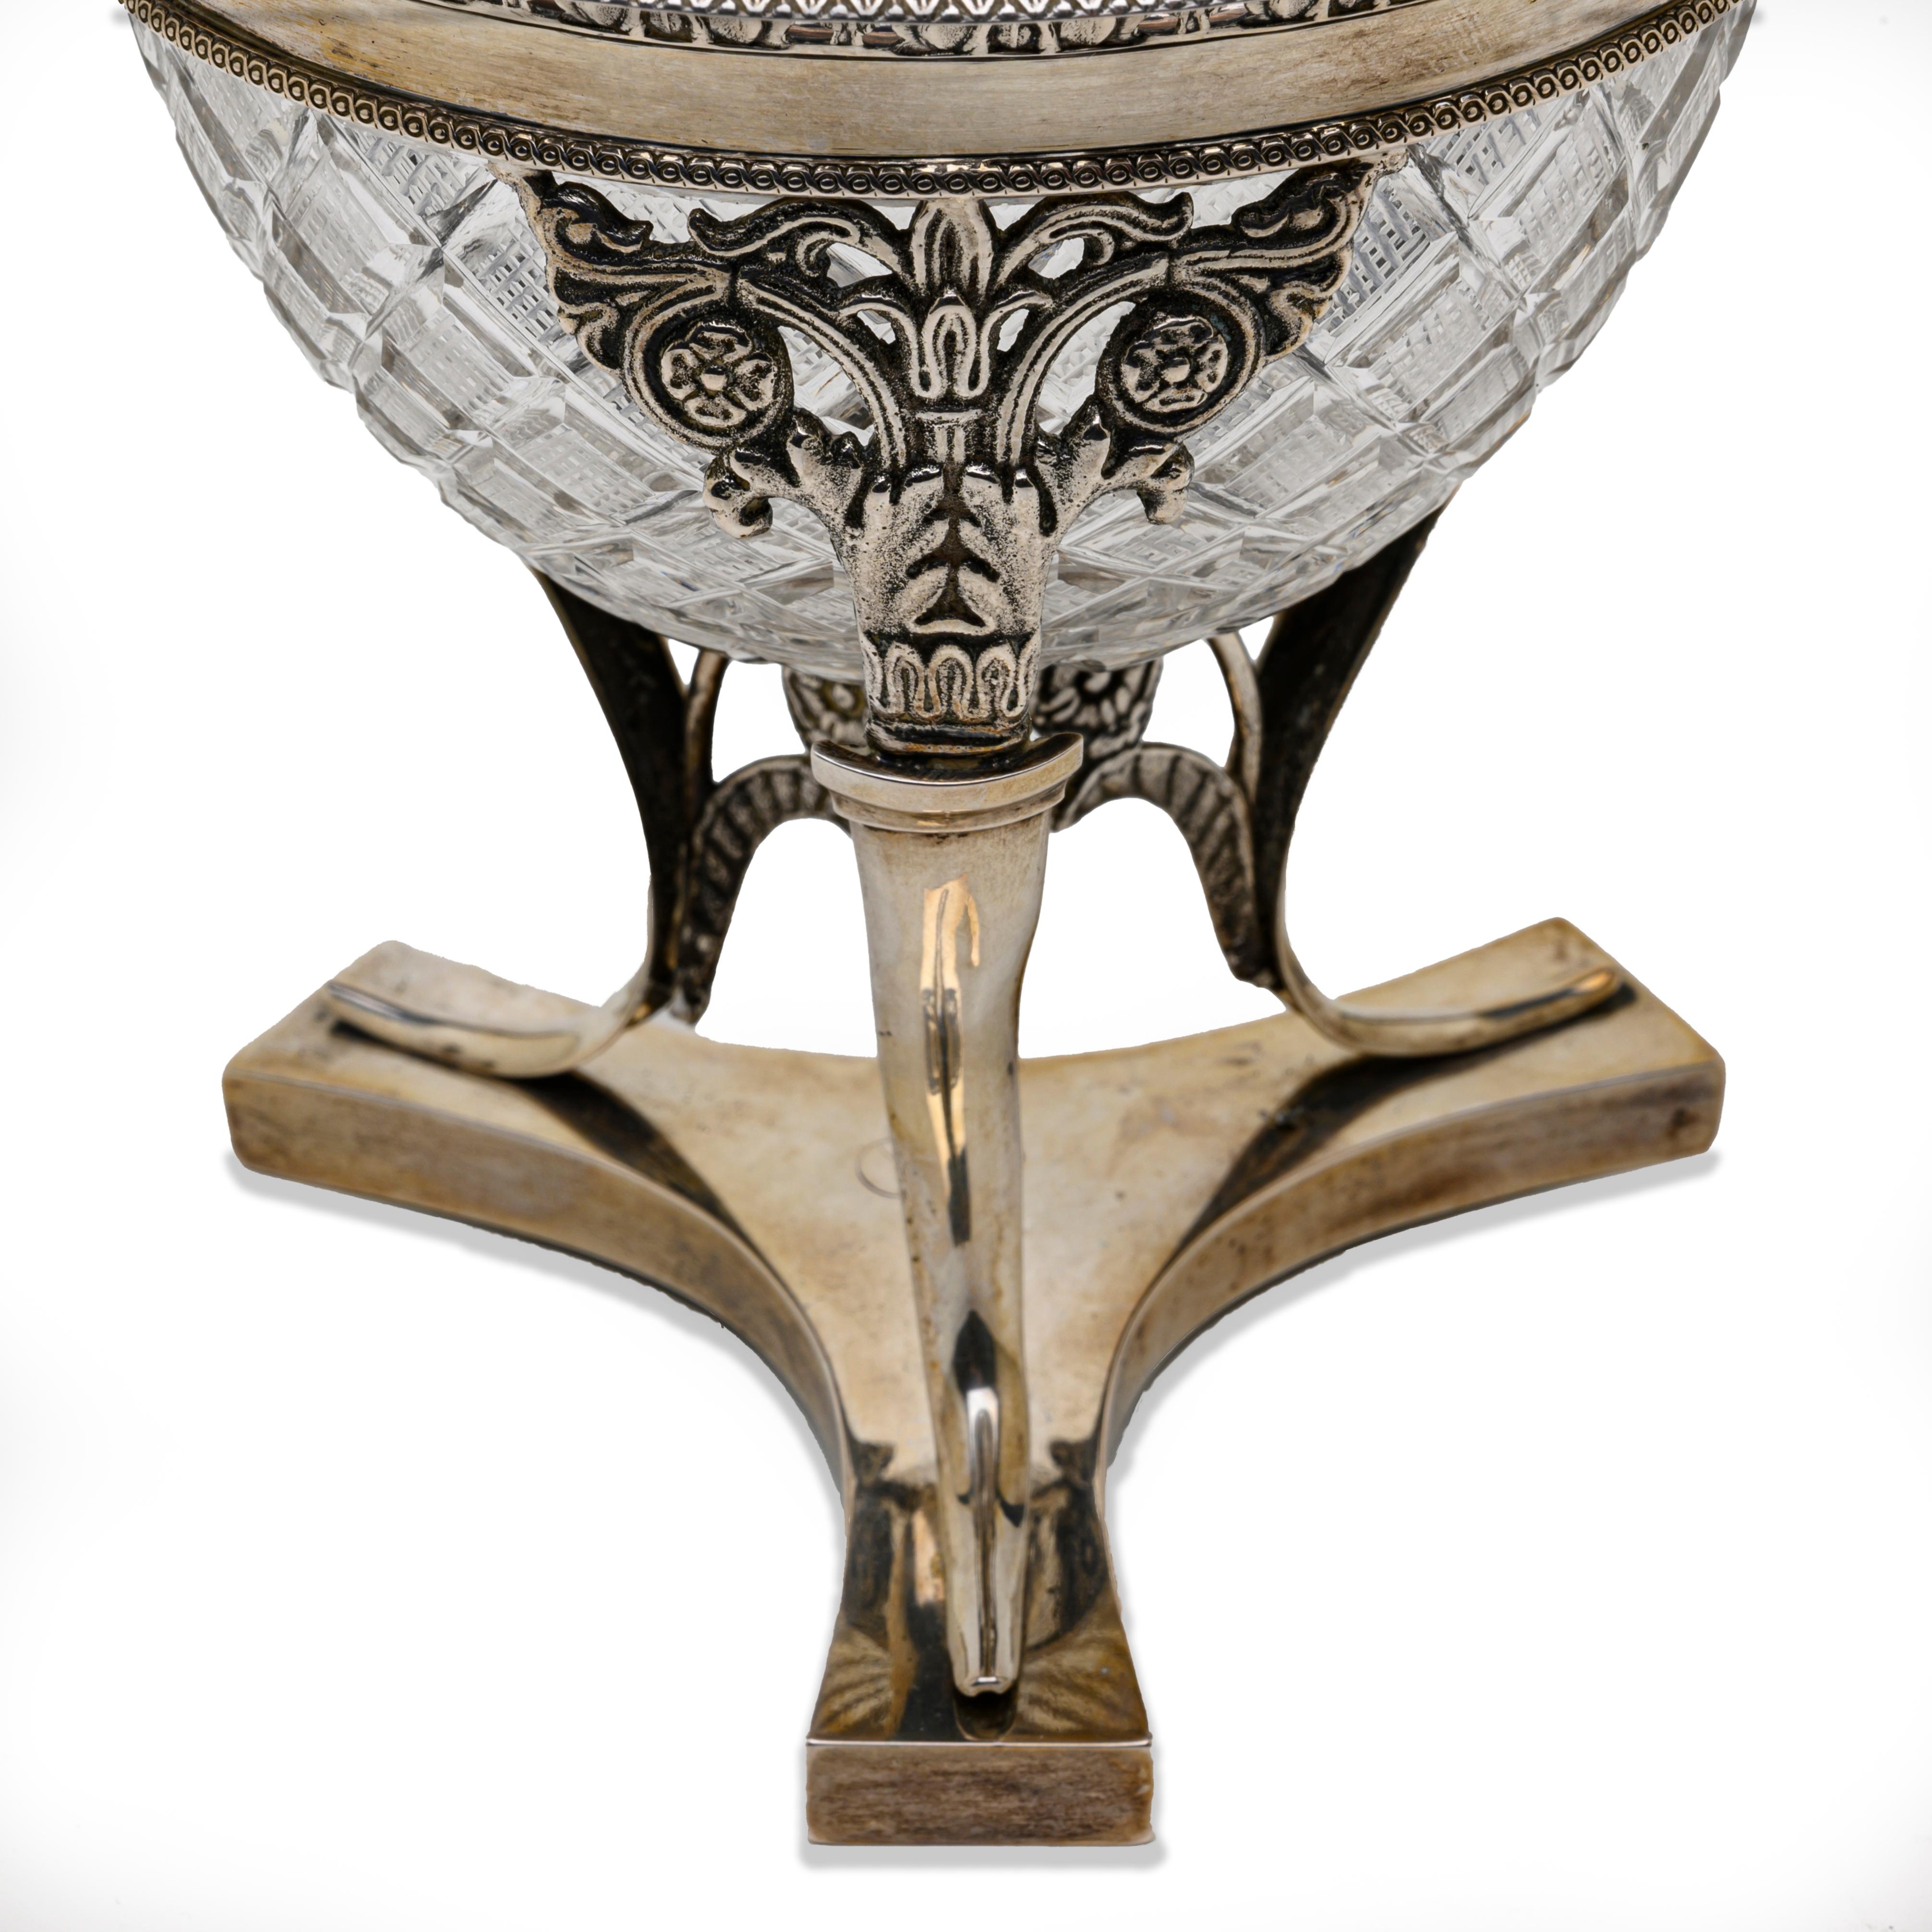 From Milan a 19th century Italian silver and crystal compote bowl in good condition from a private collection. This antique Neoclassical covered compote bowl has a very fine hand-chased vegetal decoration and engraving, a lovely cast engraved silver